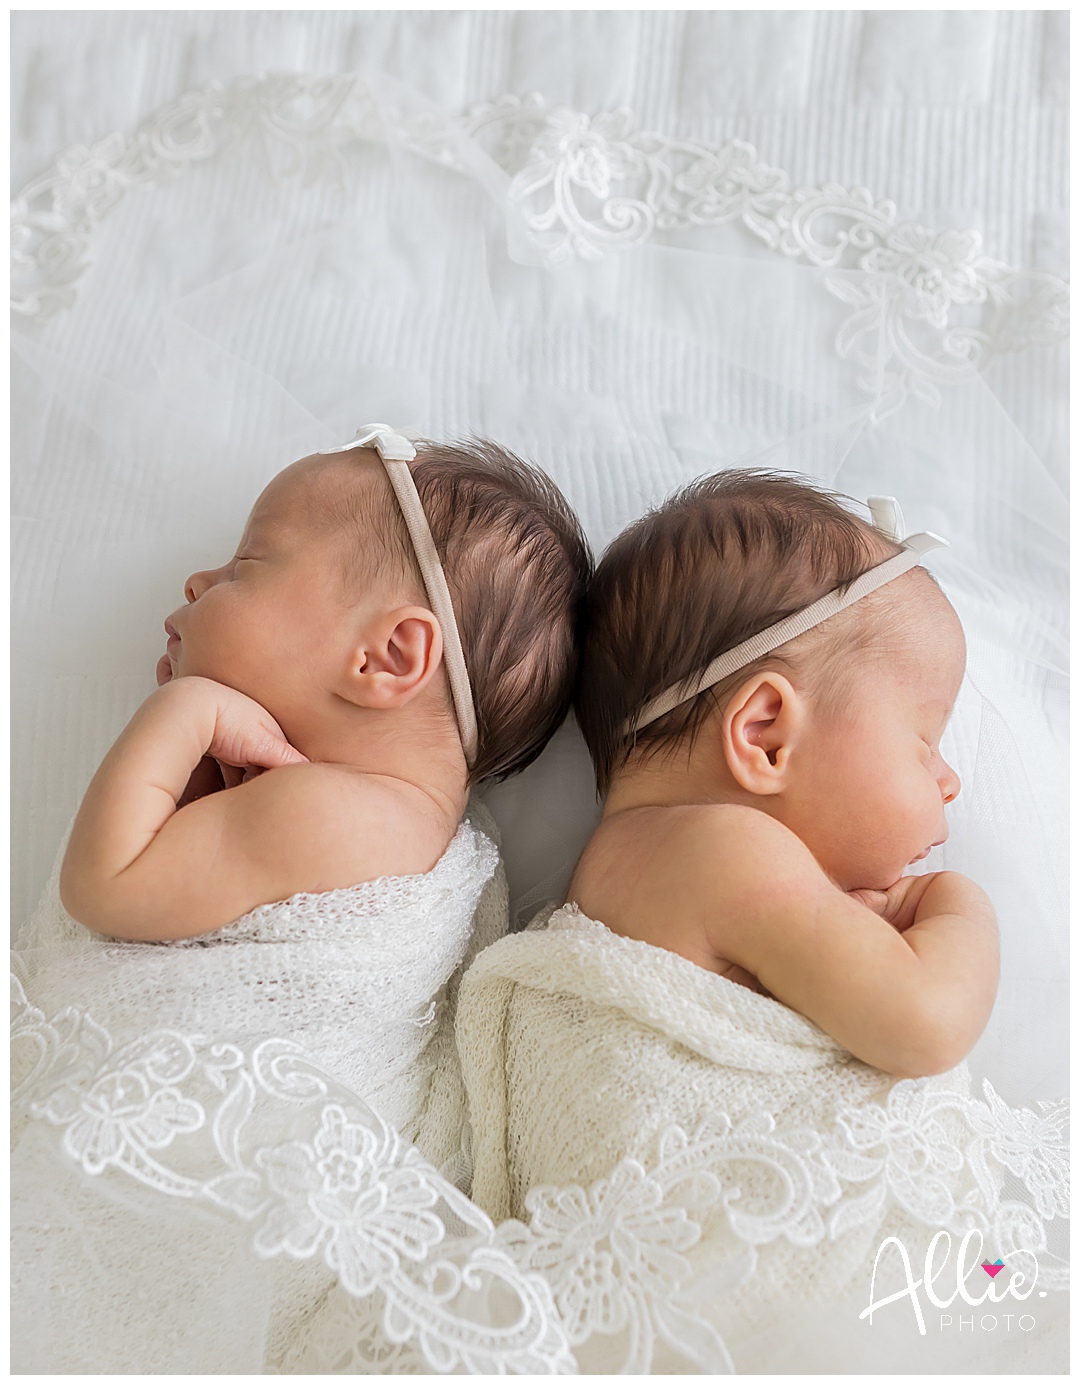 at-home newborn session baby girls with mom's wedding veil